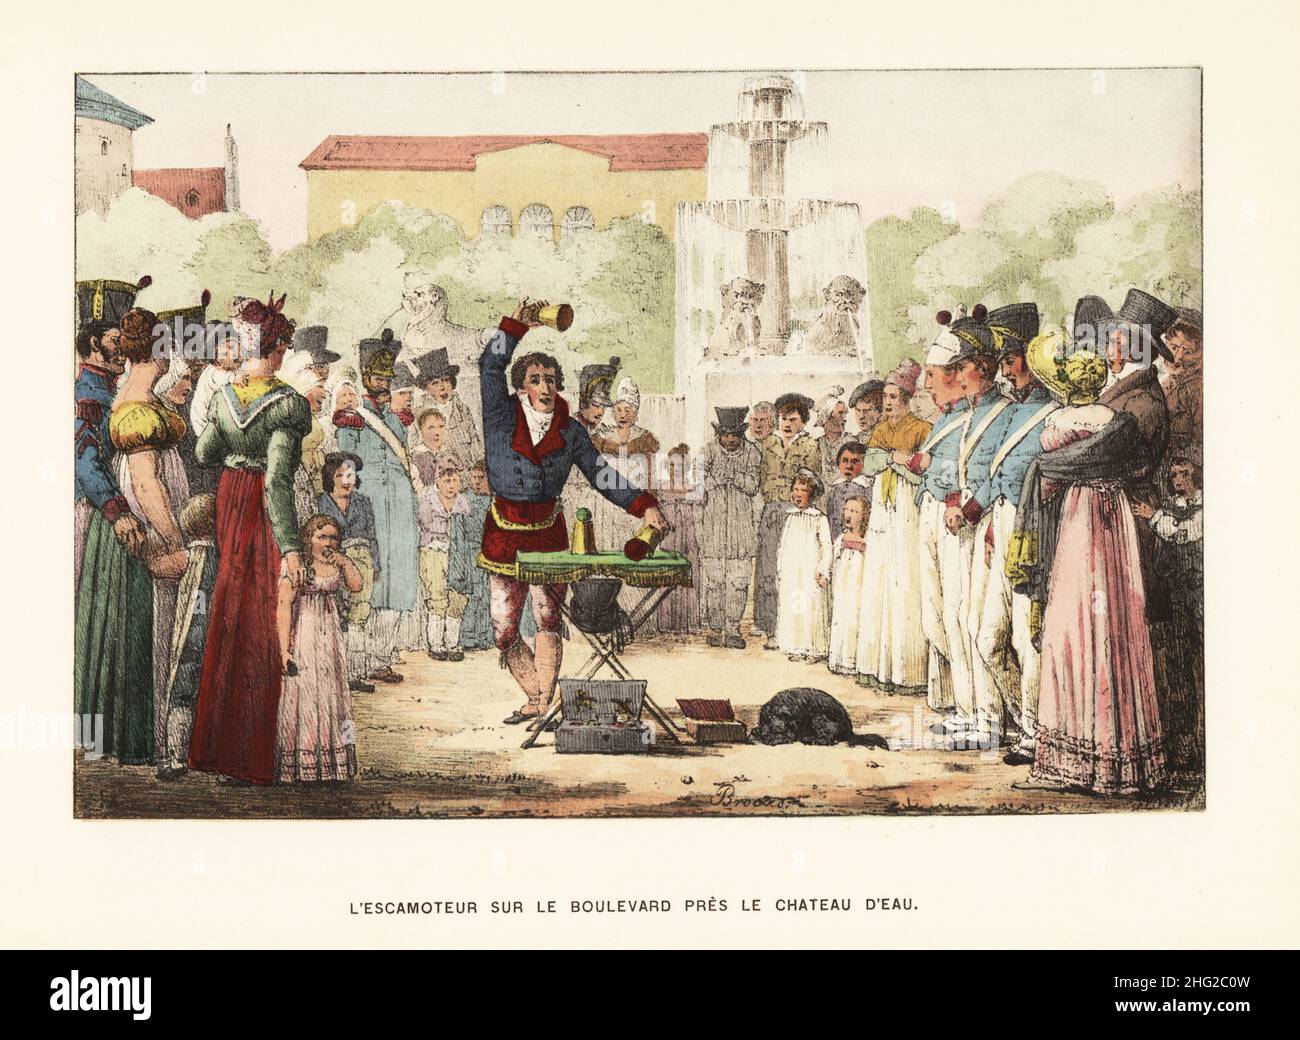 Magician at the Chateau d'Eau performing sleight of hand in front of an audience of soldiers and nurses. Cups and balls or the shell game trick. From an illustration by Victor Auver from A Tour through Paris, 1825. L'escamoteur sur le boulevard pres le Chateau d'Eau. Handcoloured lithograph from Henry Rene d’Allemagne’s Recreations et Passe-Temps, Games and Pastimes, Hachette, Paris, 1906. Stock Photo